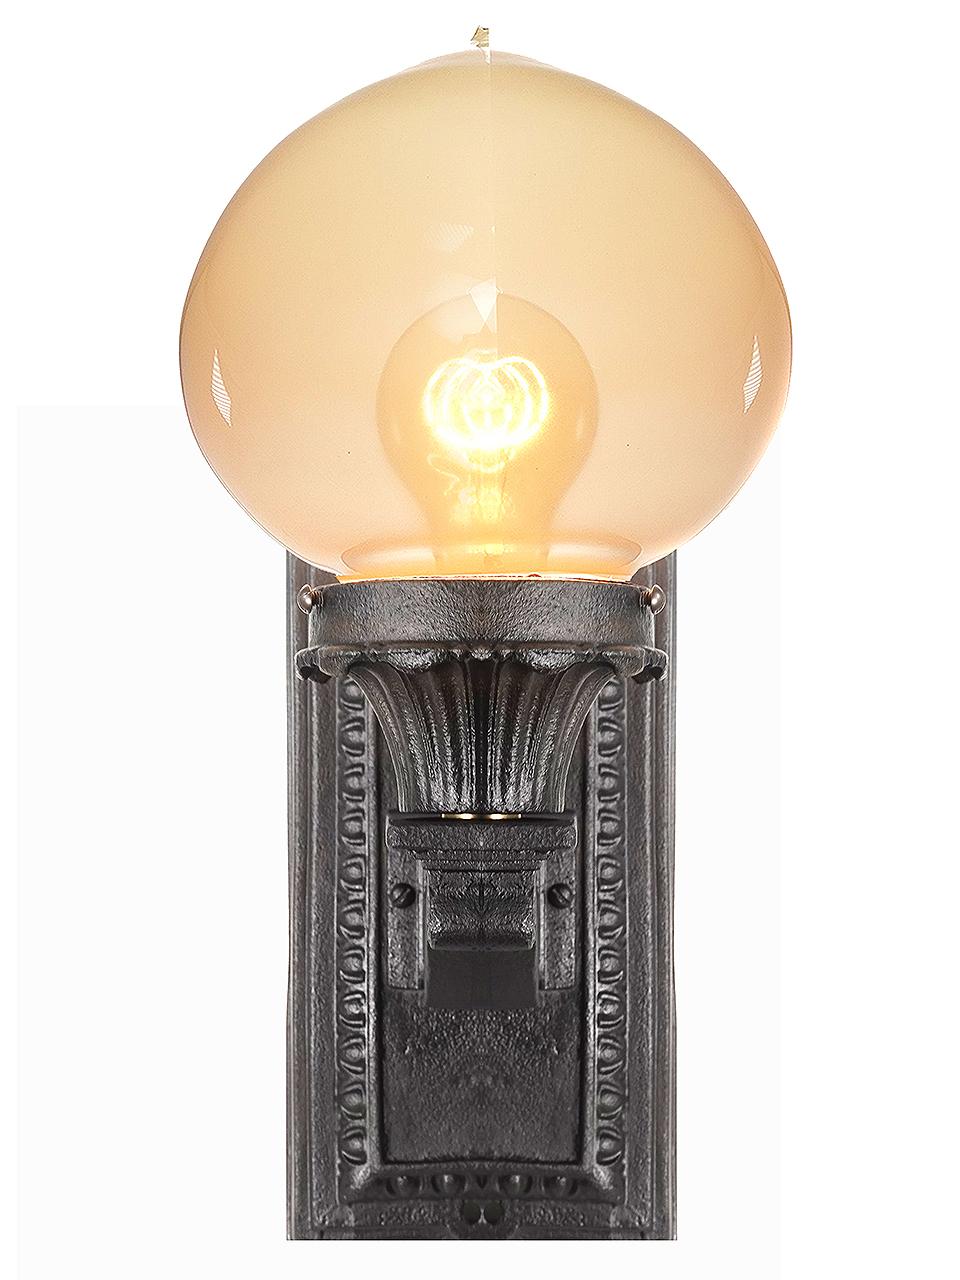 We have a collection of these original cast iron wall bracket sconces in stock. This is a classic design that we refinished and rewired. The hand blown tipped globe is  nice contrast to the dark iron finish. These look equally good pointing up or